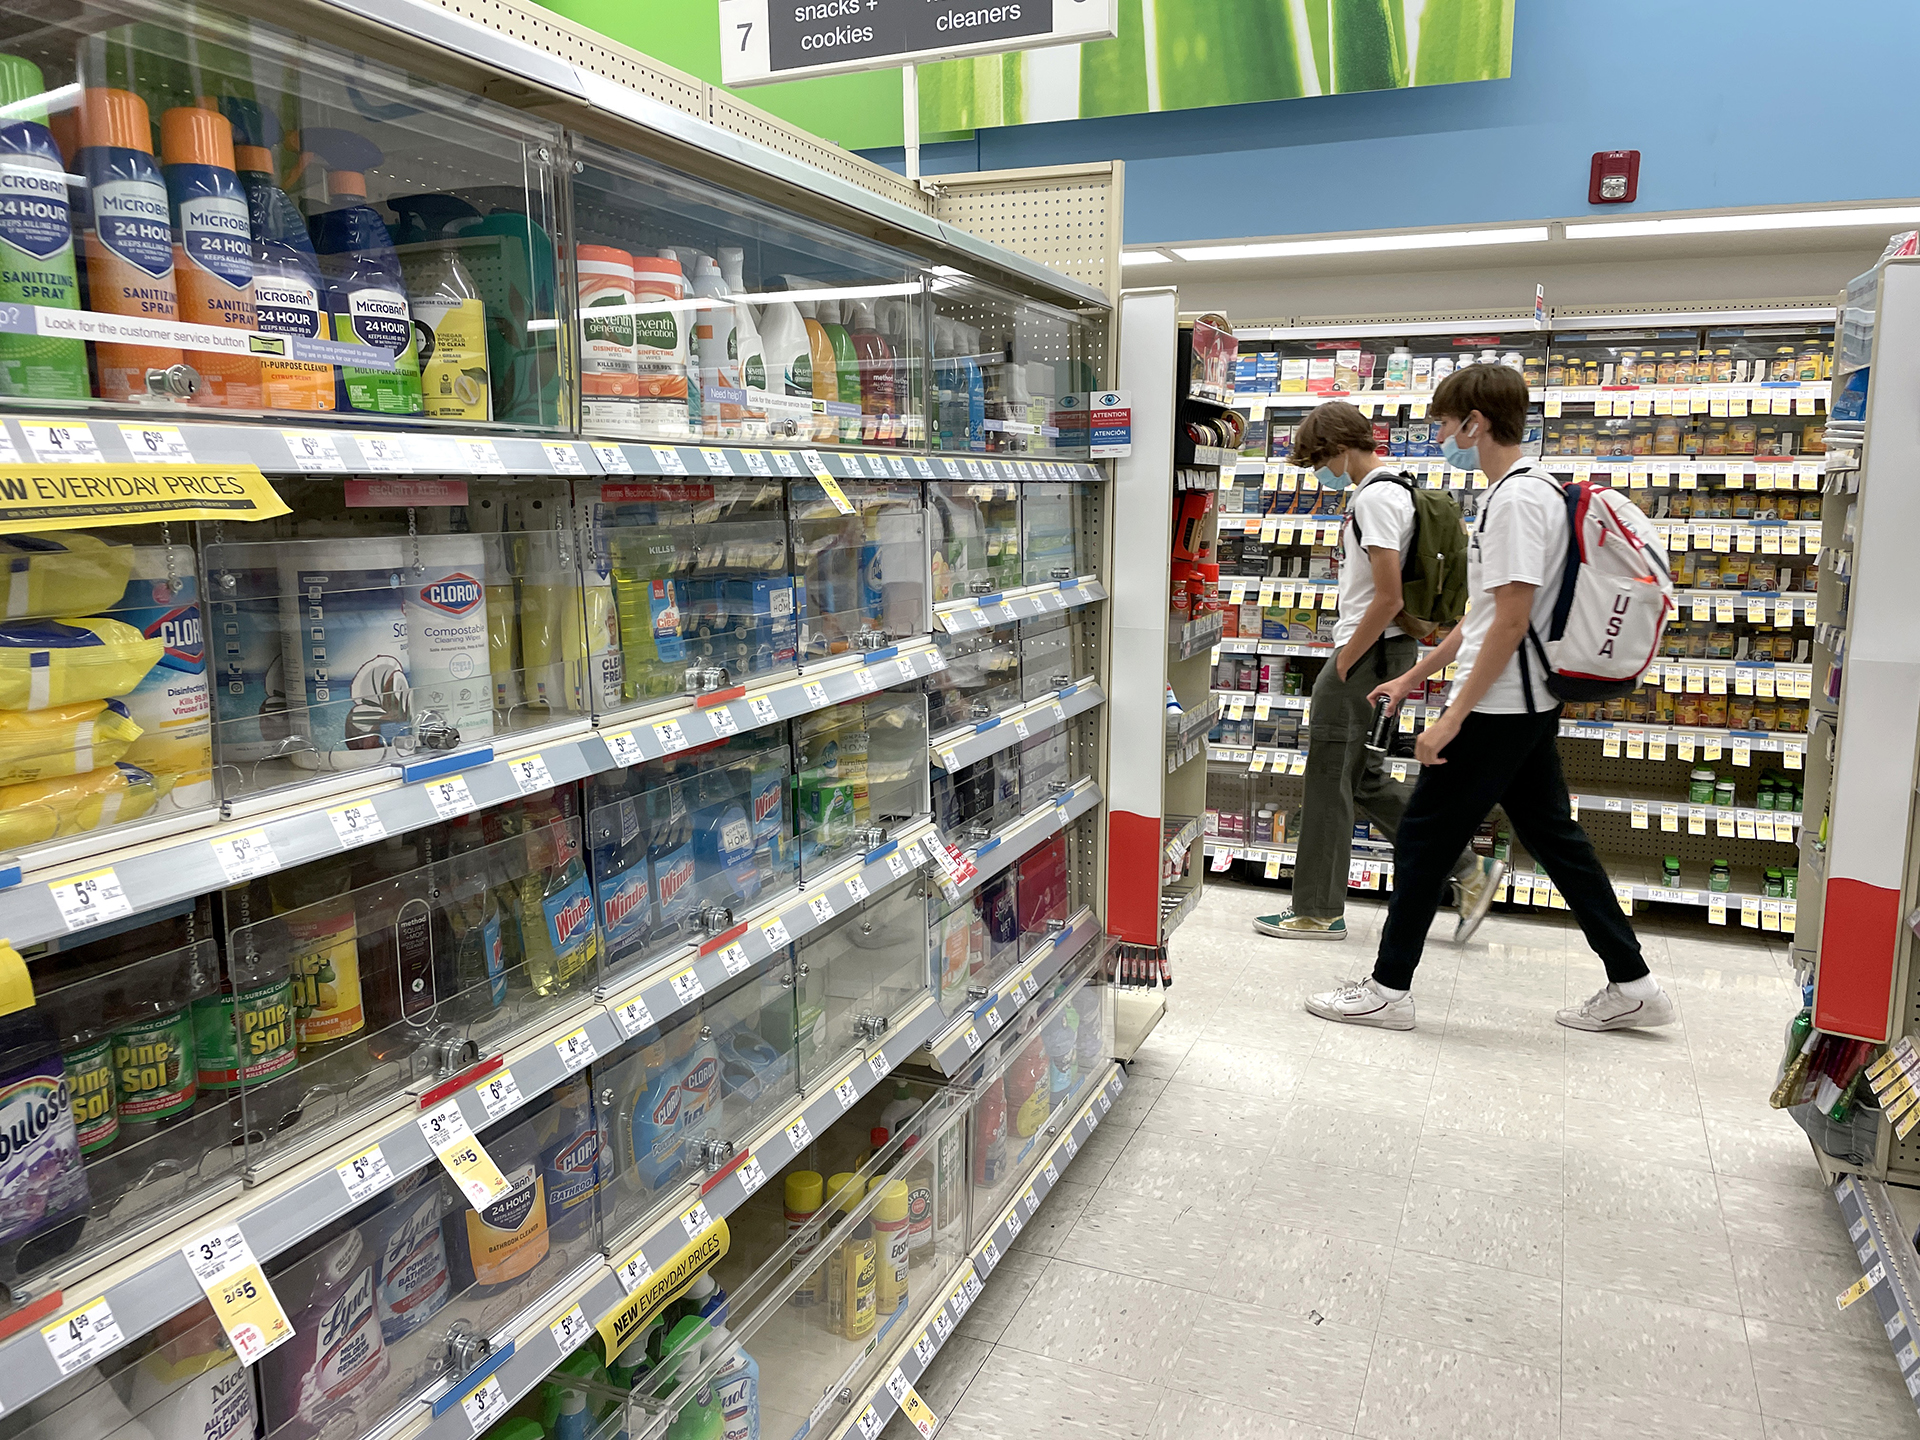 An entire aisle of goods locked behind plexiglass cabinets. 